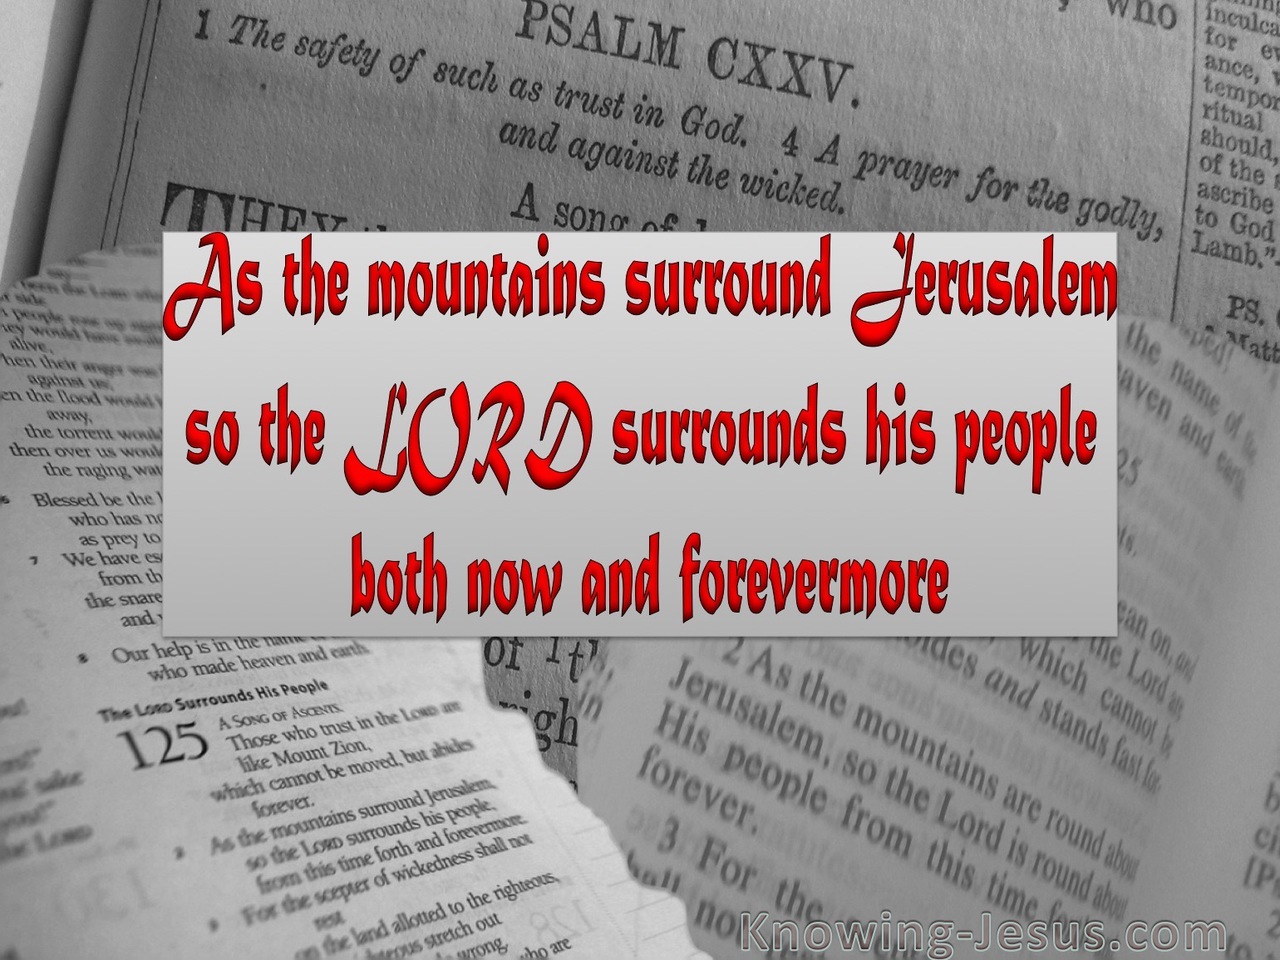 Psalm 125:2 The Lord Surrounds His People (red)